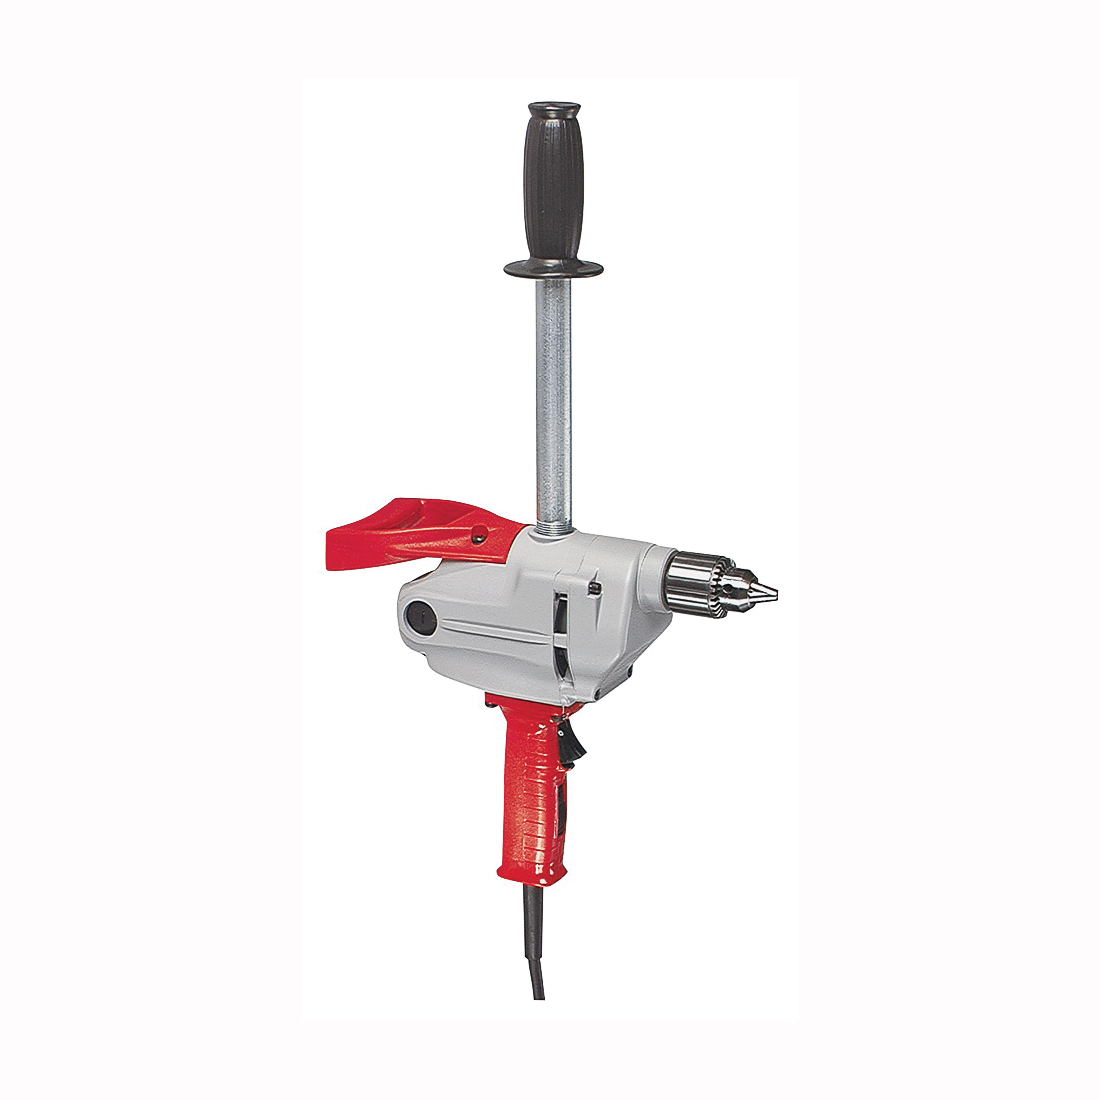 1660-6 Electric Drill, 7 A, 1/2 in Chuck, Keyed Chuck, 8 ft L Cord